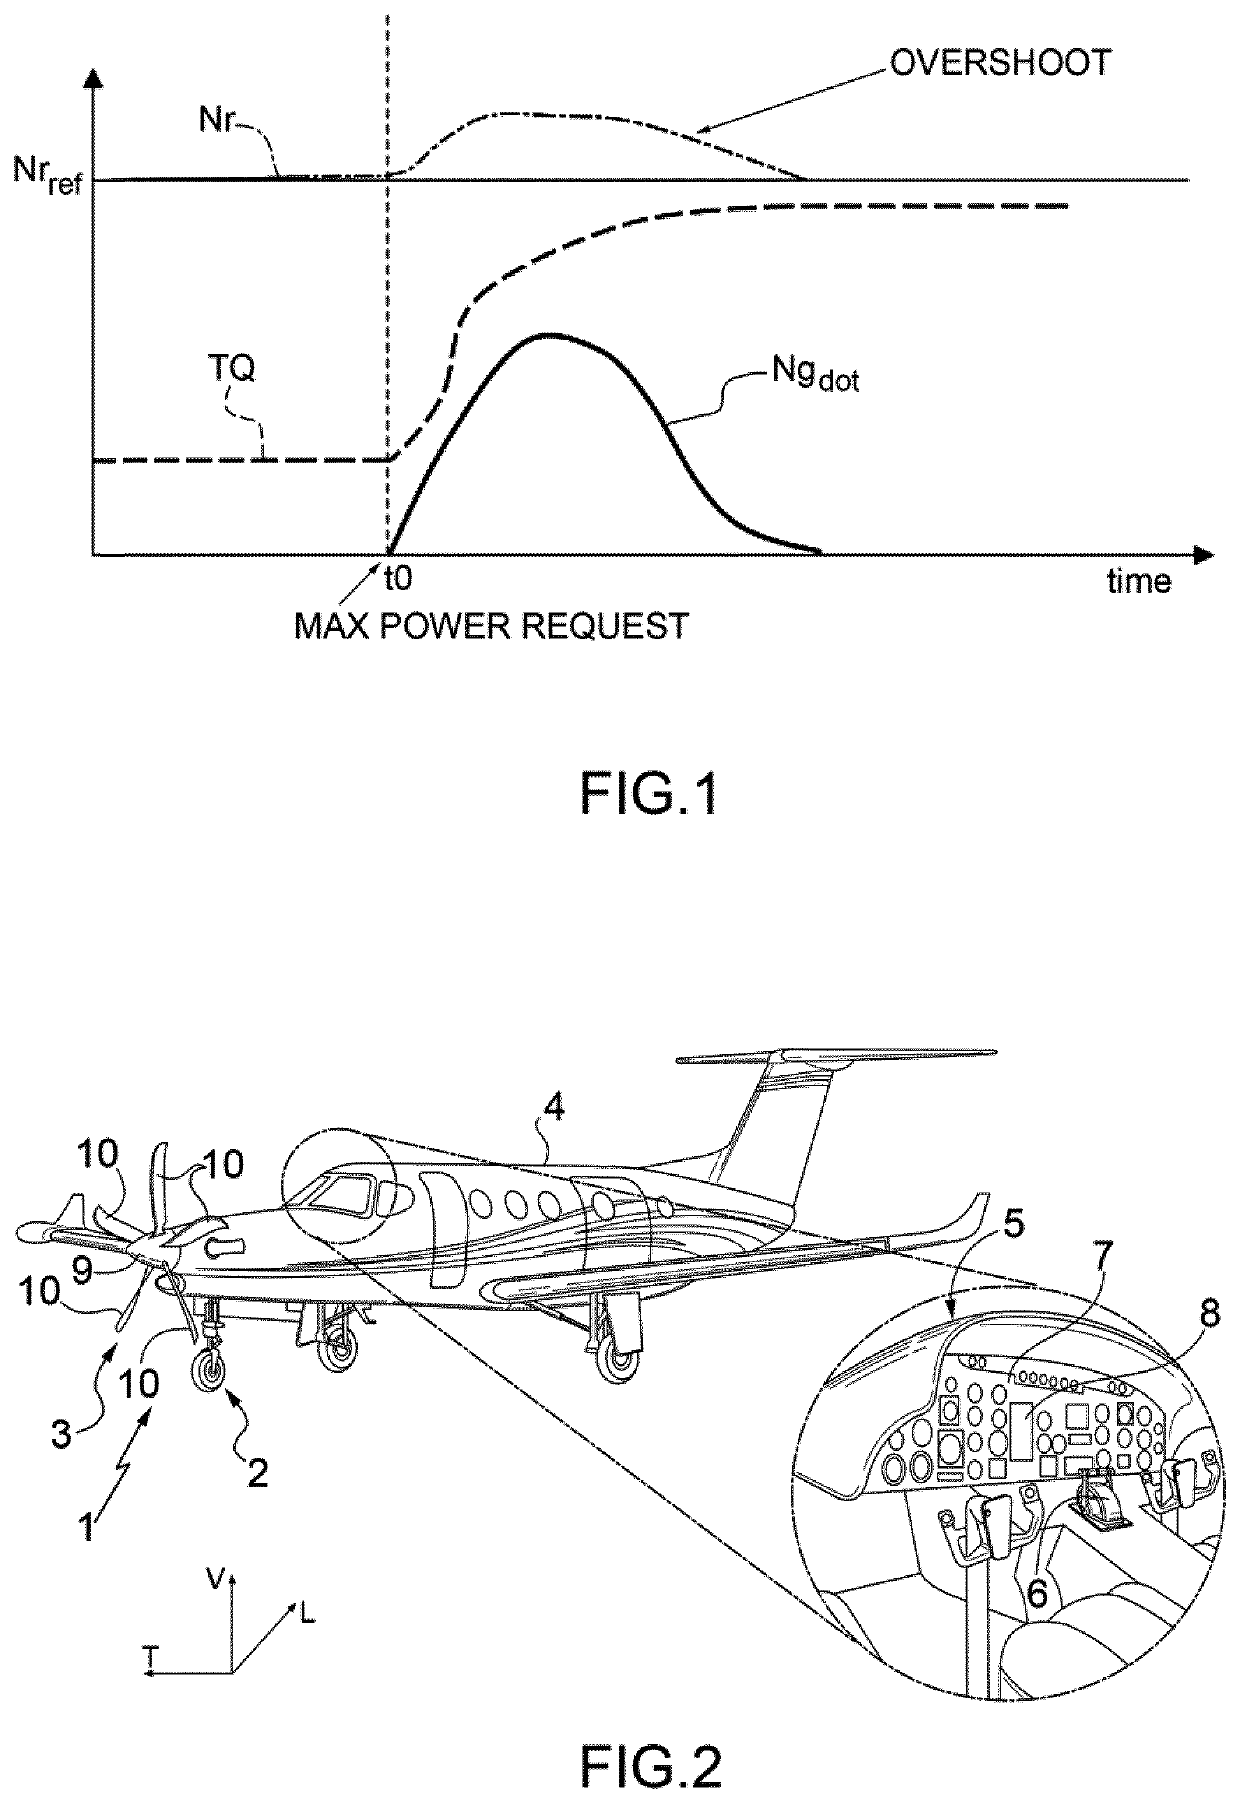 Control system and method for propeller-speed overshoot limitation in a turbopropeller engine